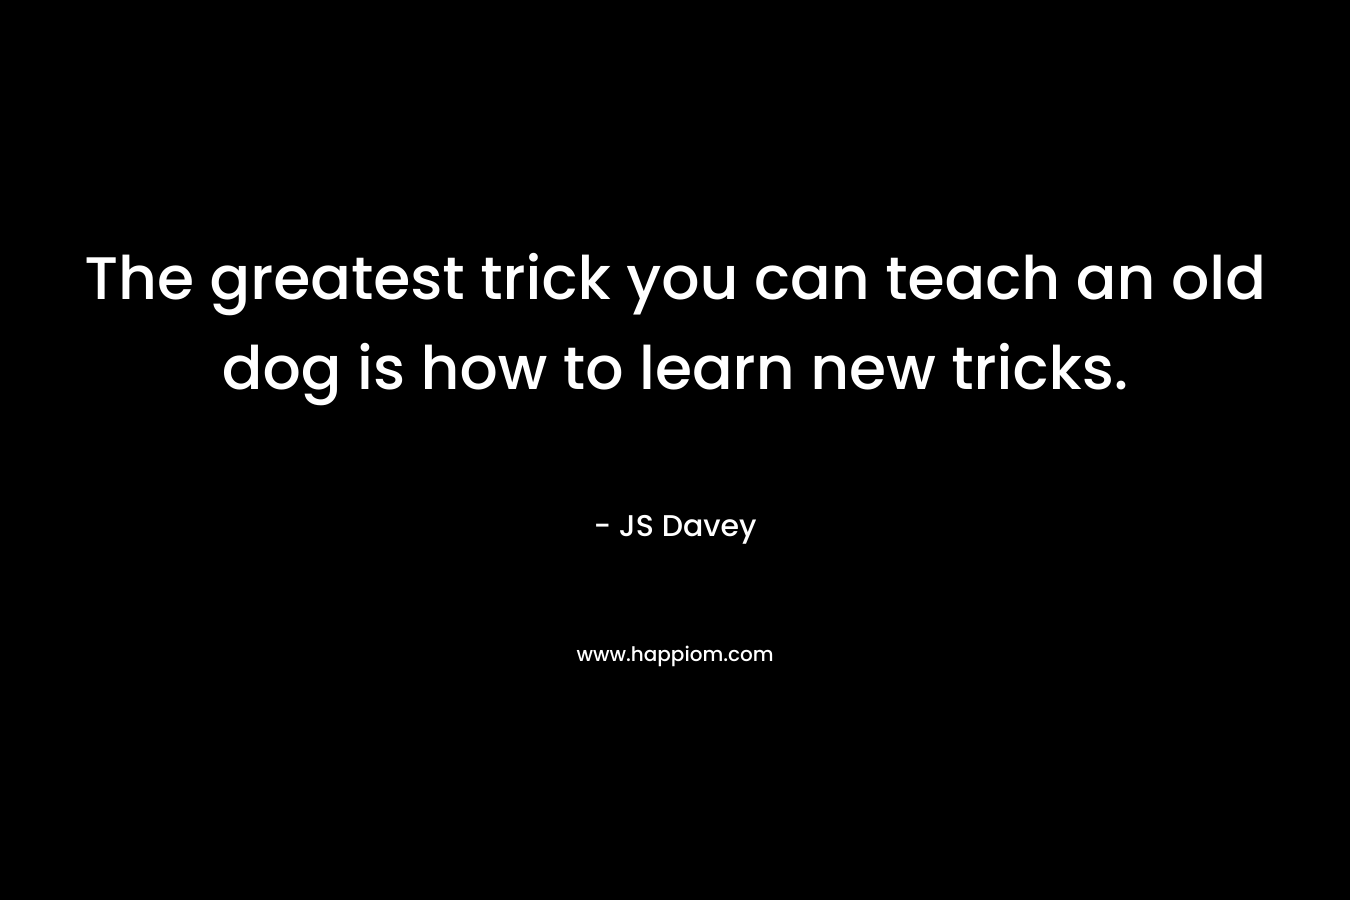 The greatest trick you can teach an old dog is how to learn new tricks. – JS Davey